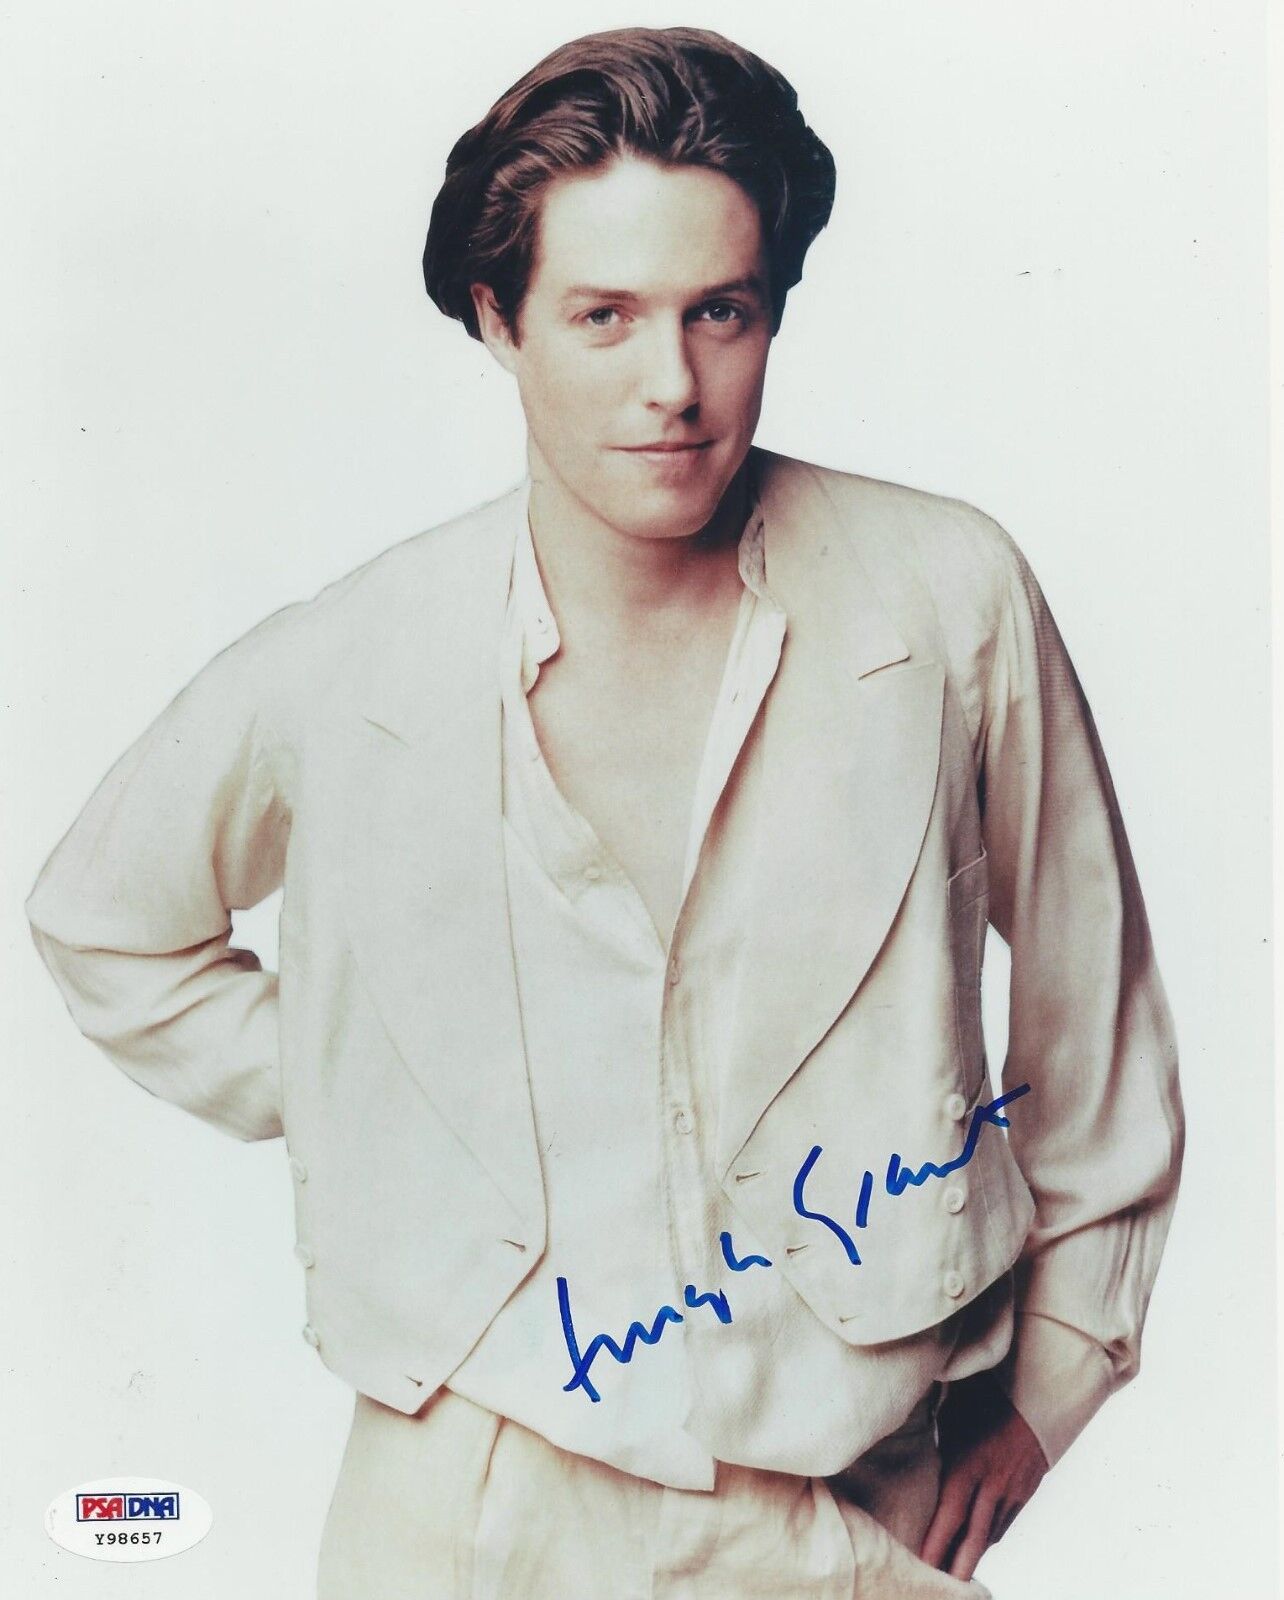 Hugh Grant Signed 8x10 Photo Poster painting - PSA/DNA # Y98657